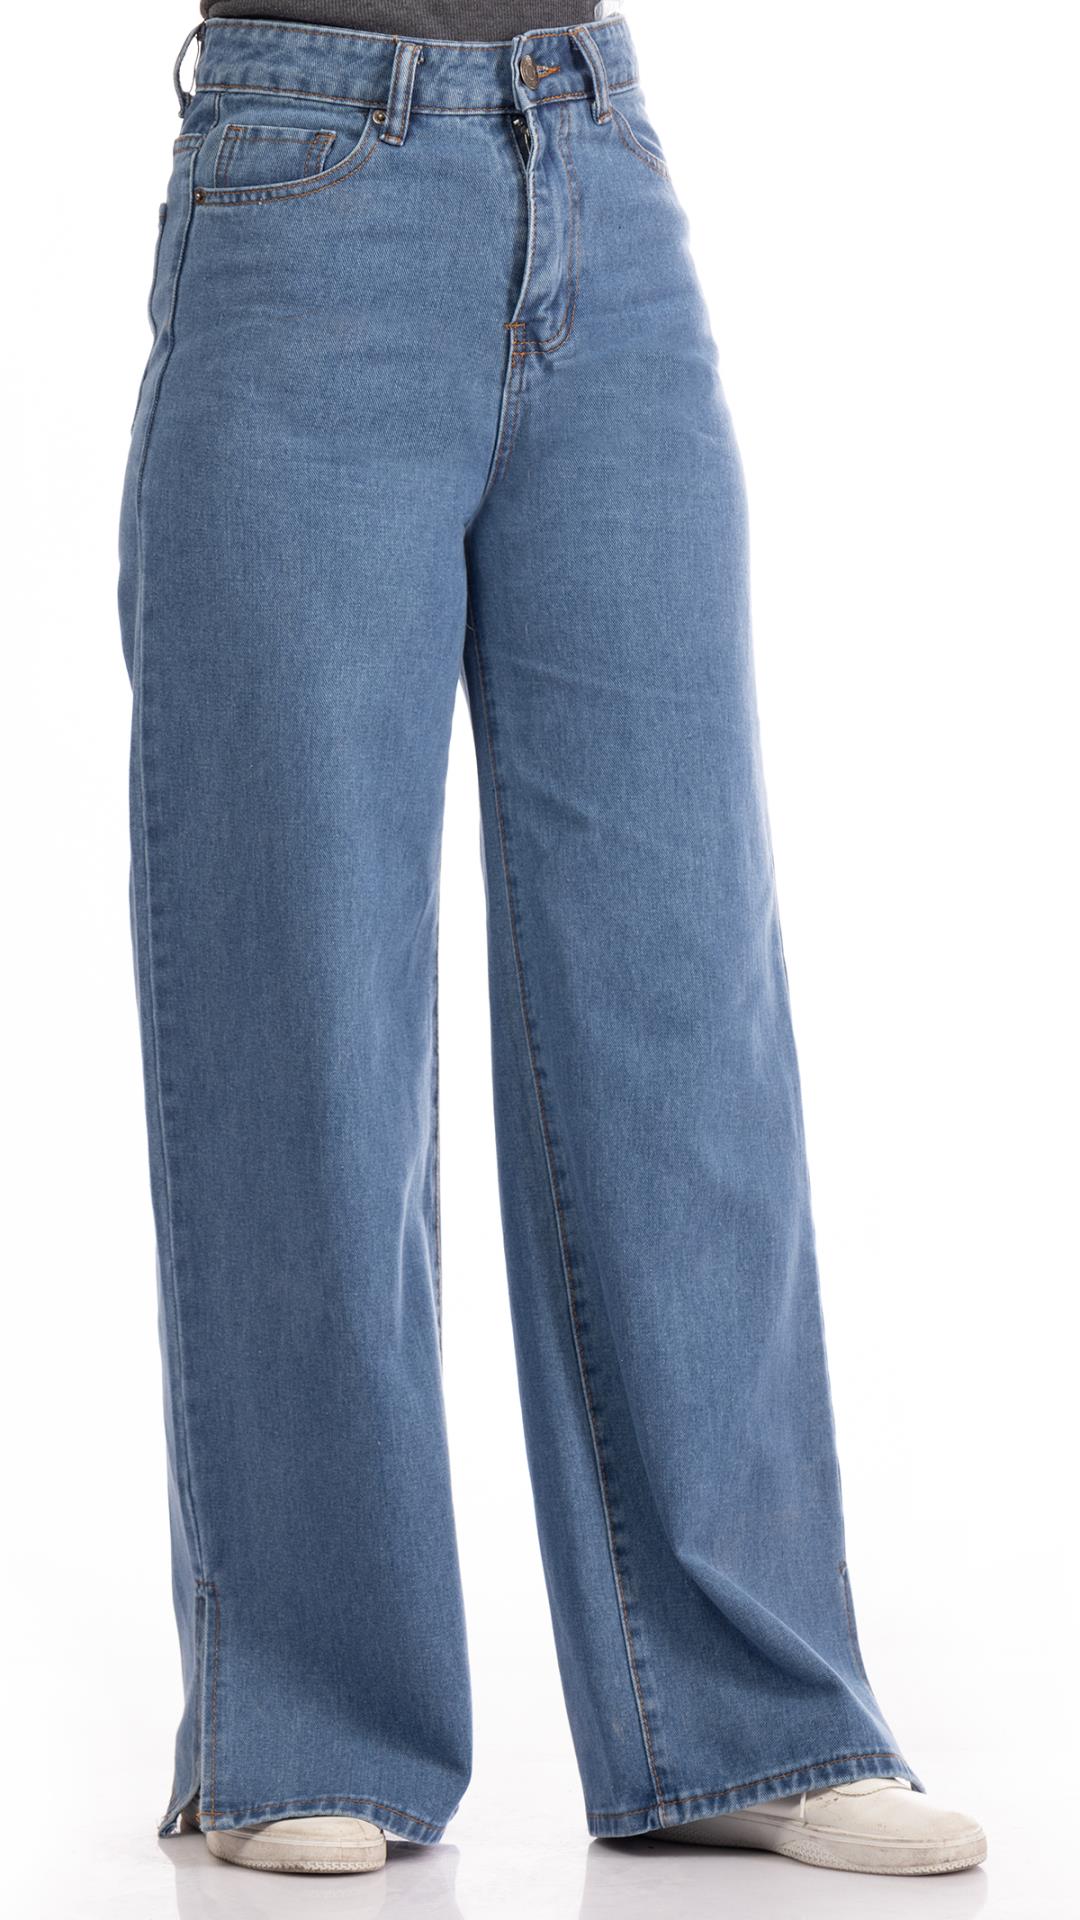 Wide jeans with a small silt at the side